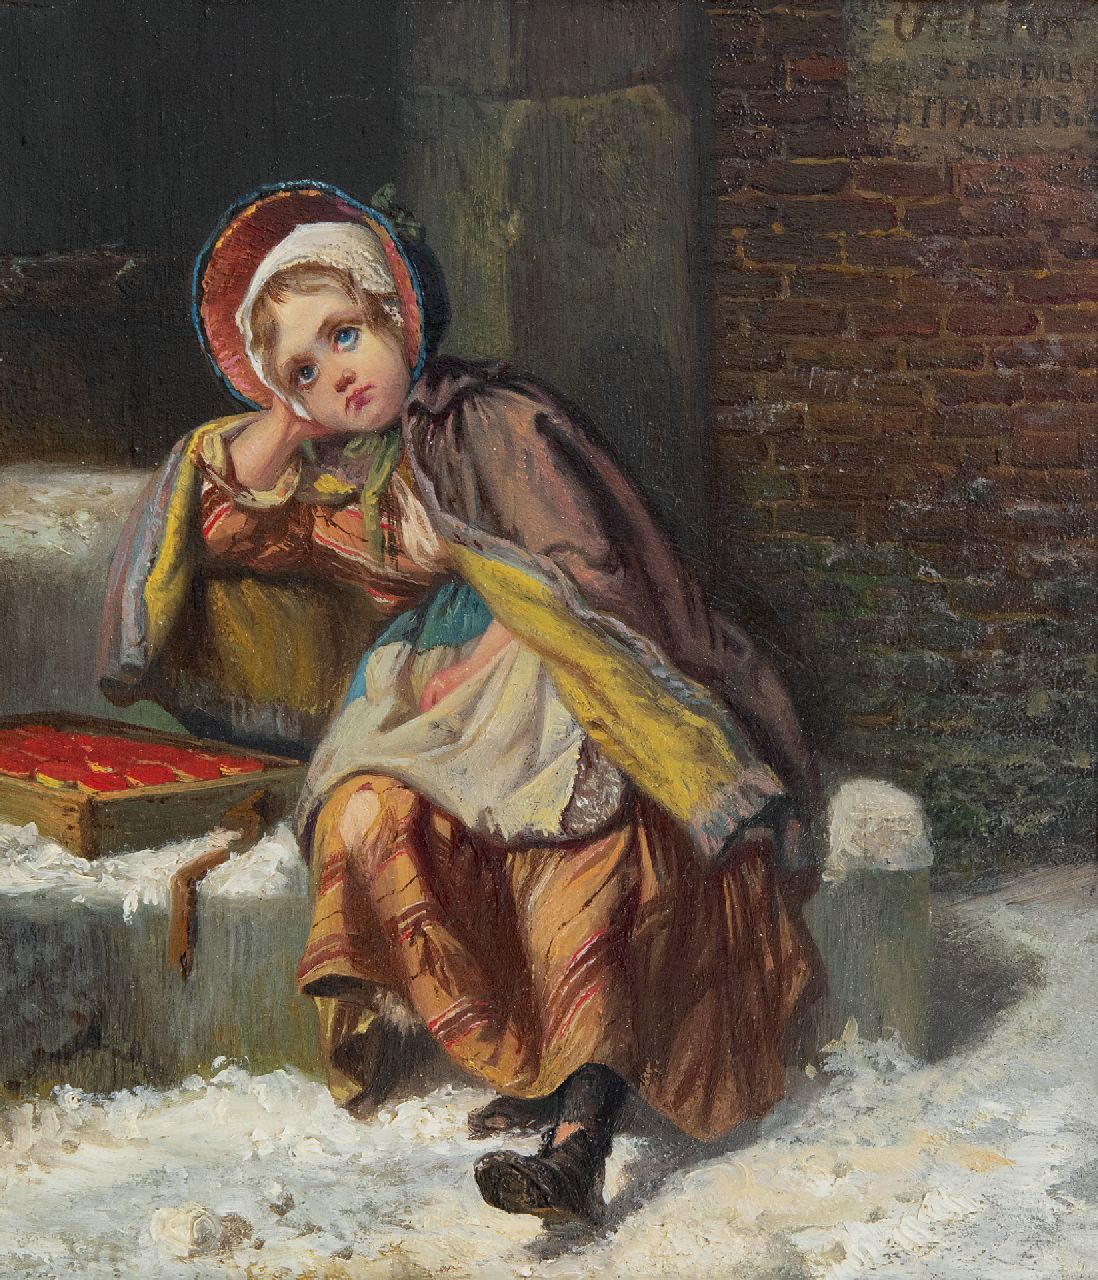 Jan Fabius | A girl selling matches in the snow, oil on panel, 21.7 x 18.9 cm, signed u.r.